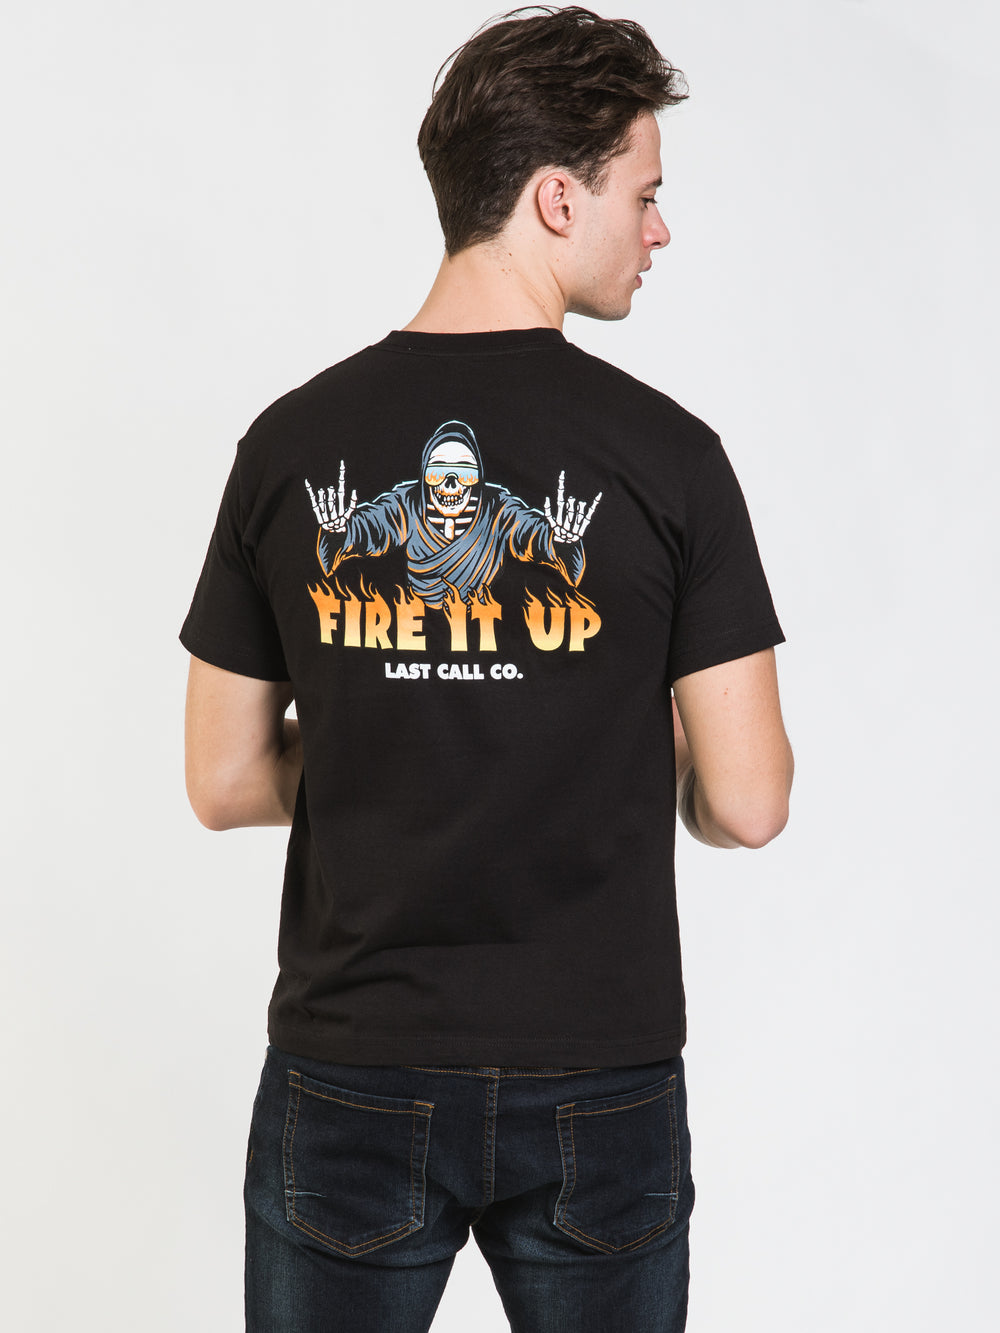 T-SHIRT "LAST CALL FIRE IT UP" - DÉSTOCKAGE